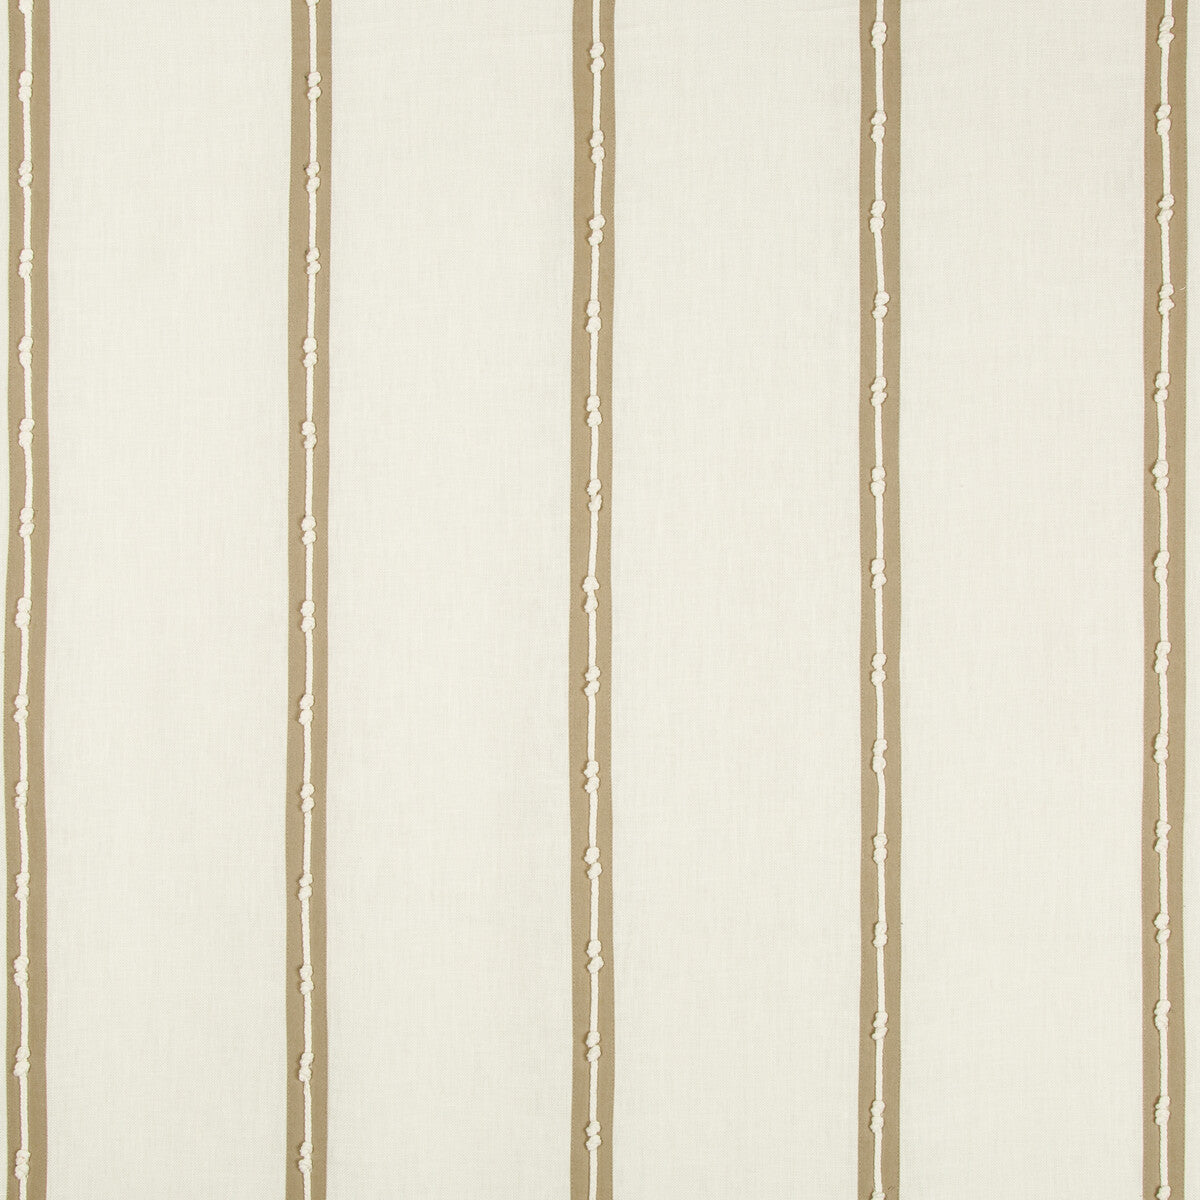 Knots Speed fabric in ivory color - pattern 4630.16.0 - by Kravet Design in the Barclay Butera Sagamore collection